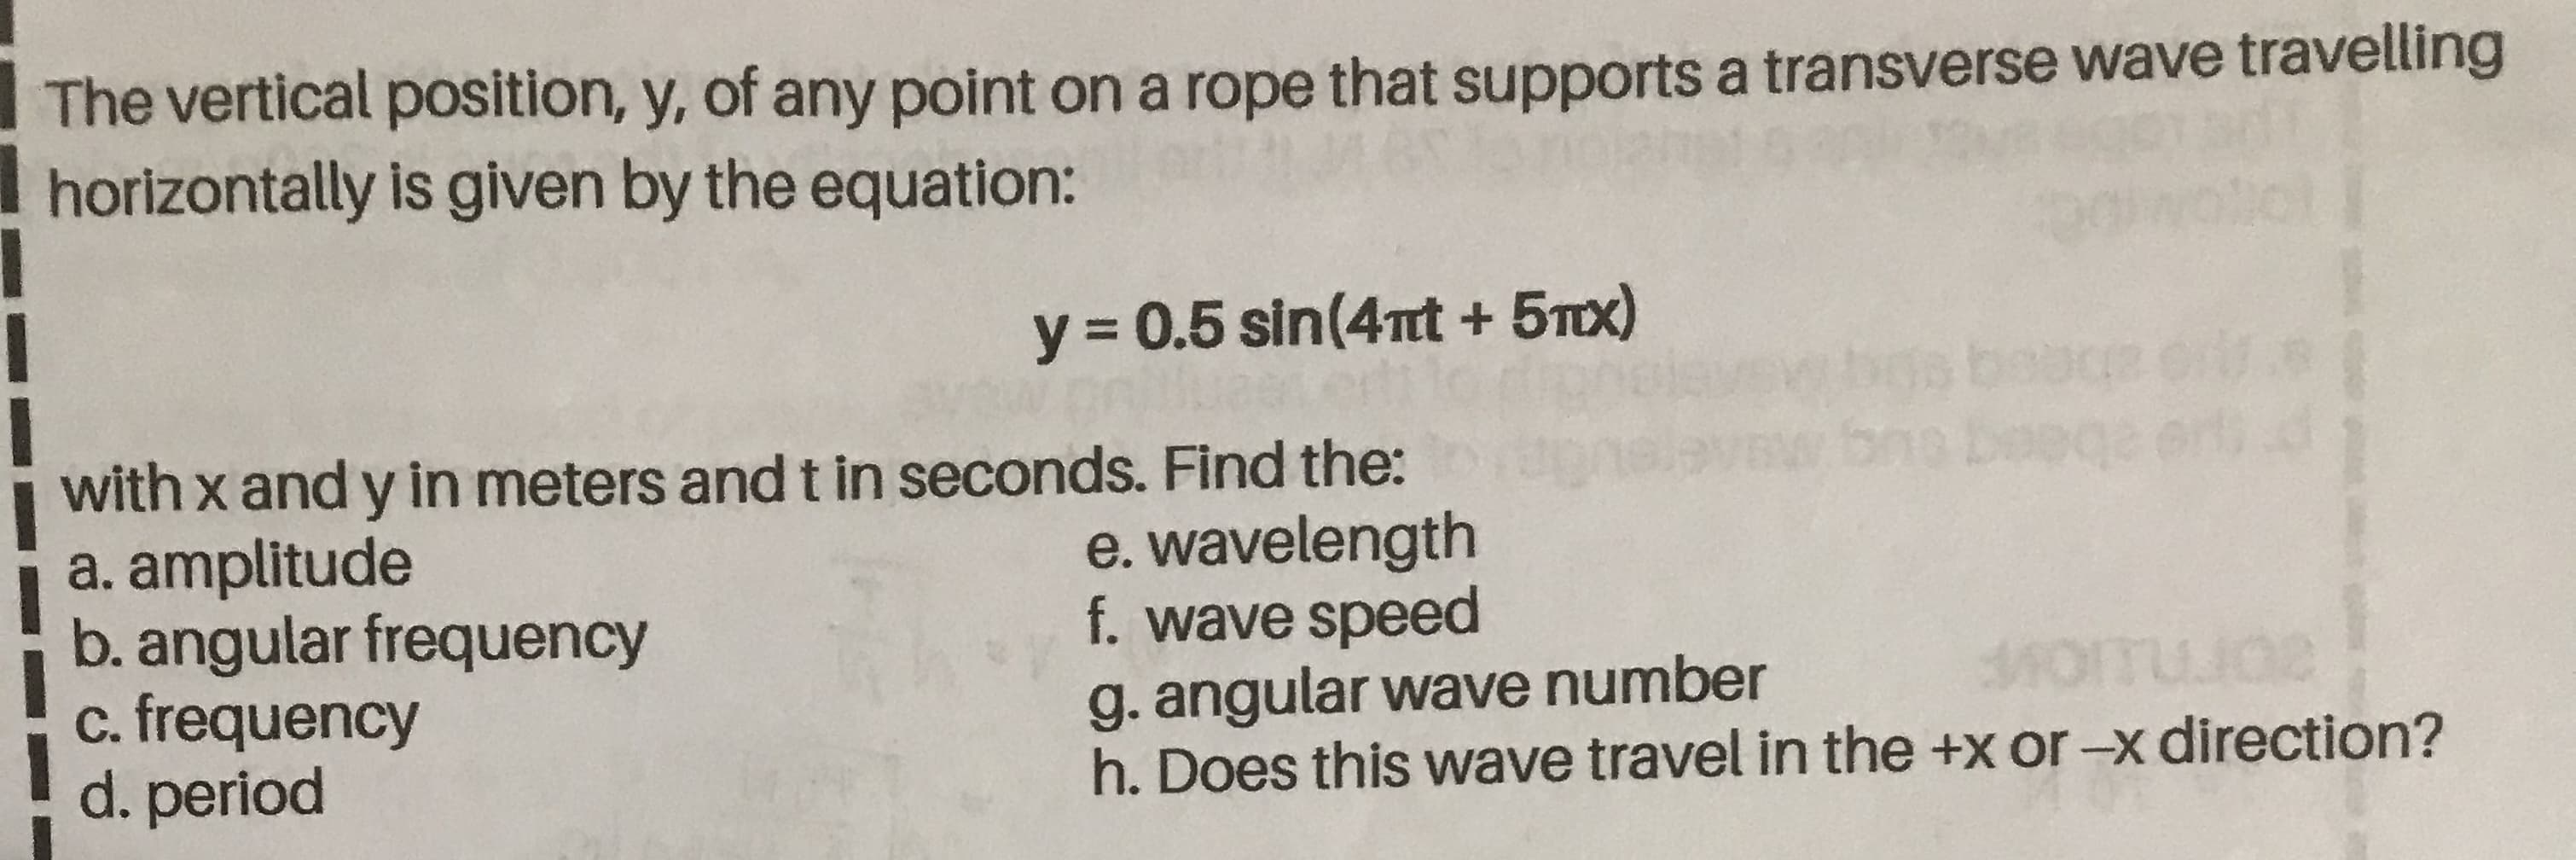 The vertical position, y, of any point on a rope that supports a transverse
horizontally is given by the equation:
y = 0.5 sin(4nt + 5Tx)
with x and y in meters and t in seconds. Find the:
a. amplitude
b. angular frequency
c. frequency
d. period
e. wavelength
f. wave speed
g. angular wave number
h. Does this wave travel in the +x or-x direction?
